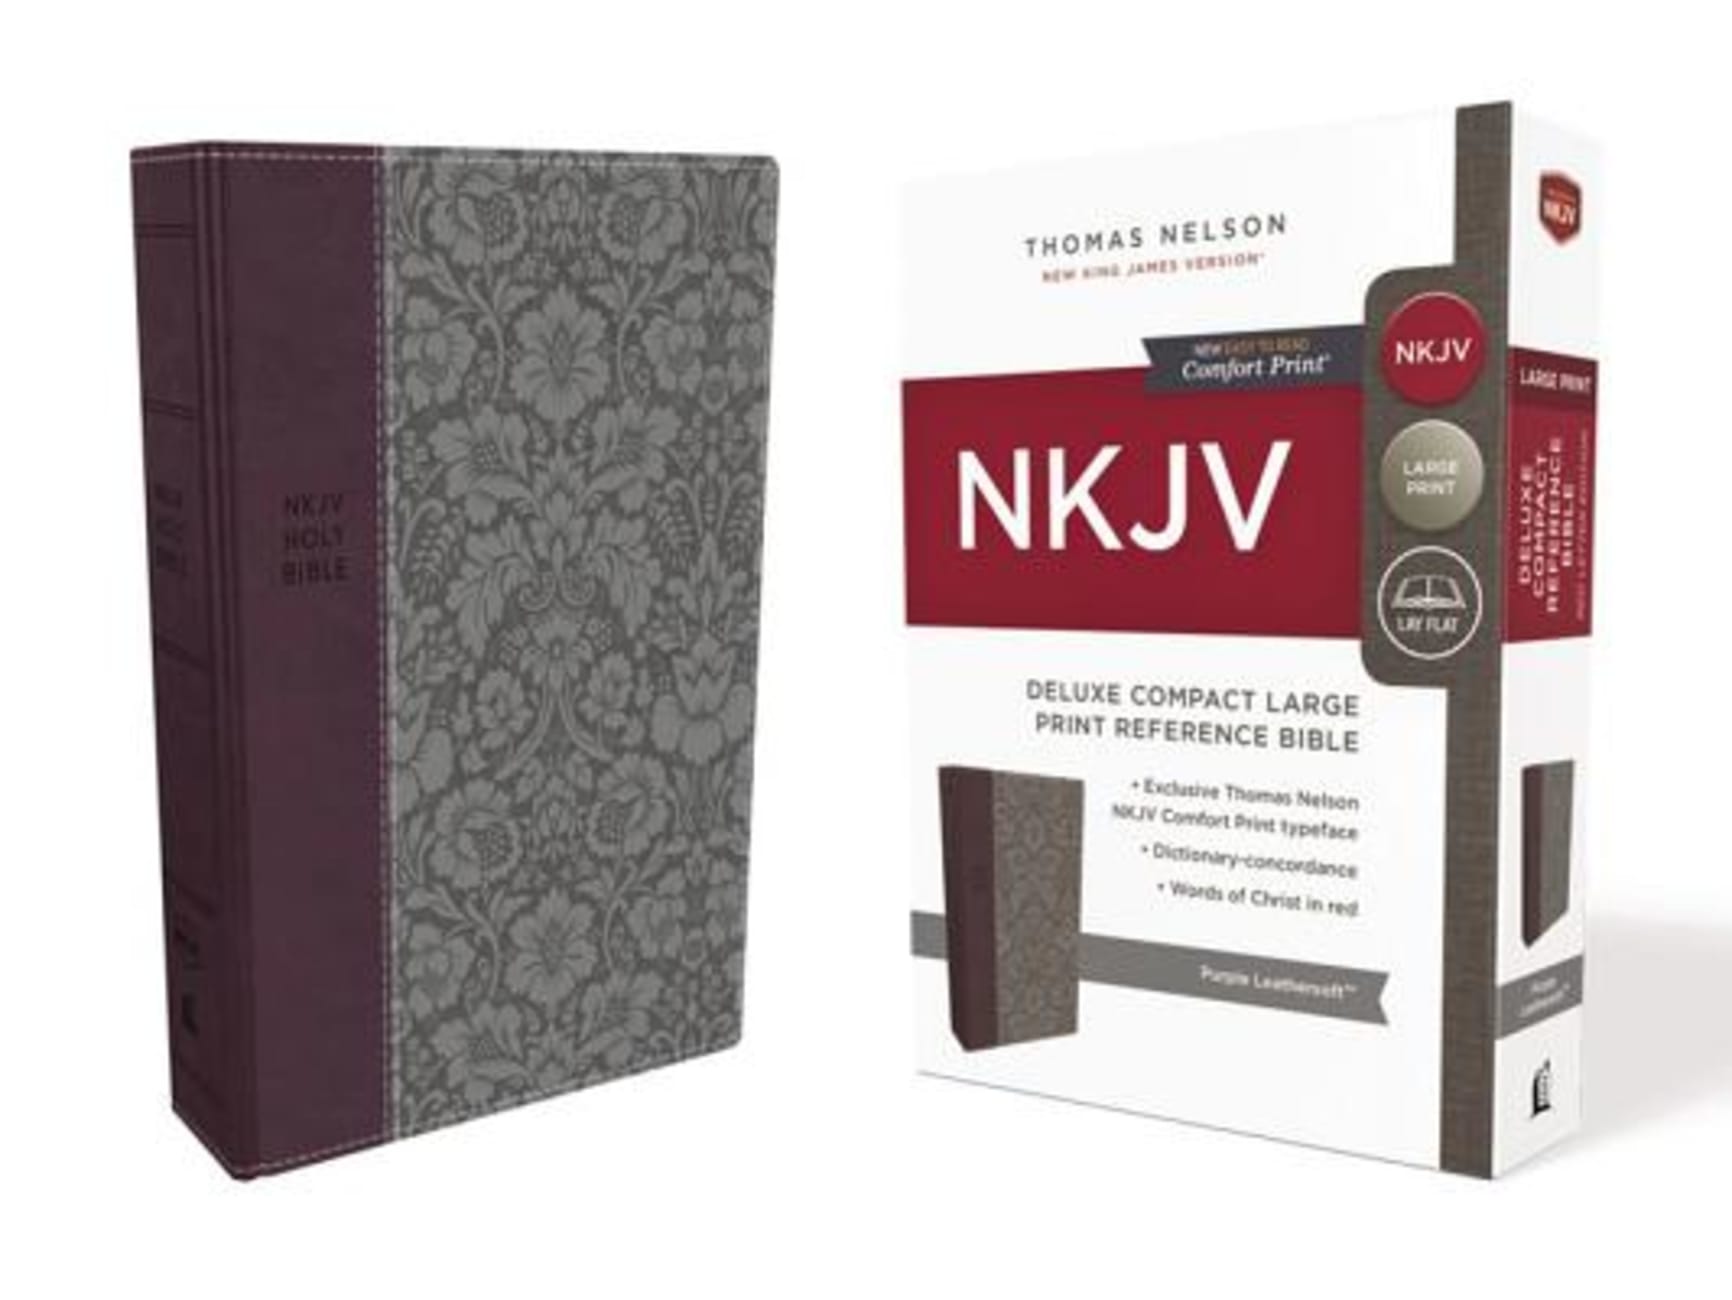 NKJV Deluxe Reference Bible Compact Large Print Purple (Red Letter Edition) Premium Imitation Leather